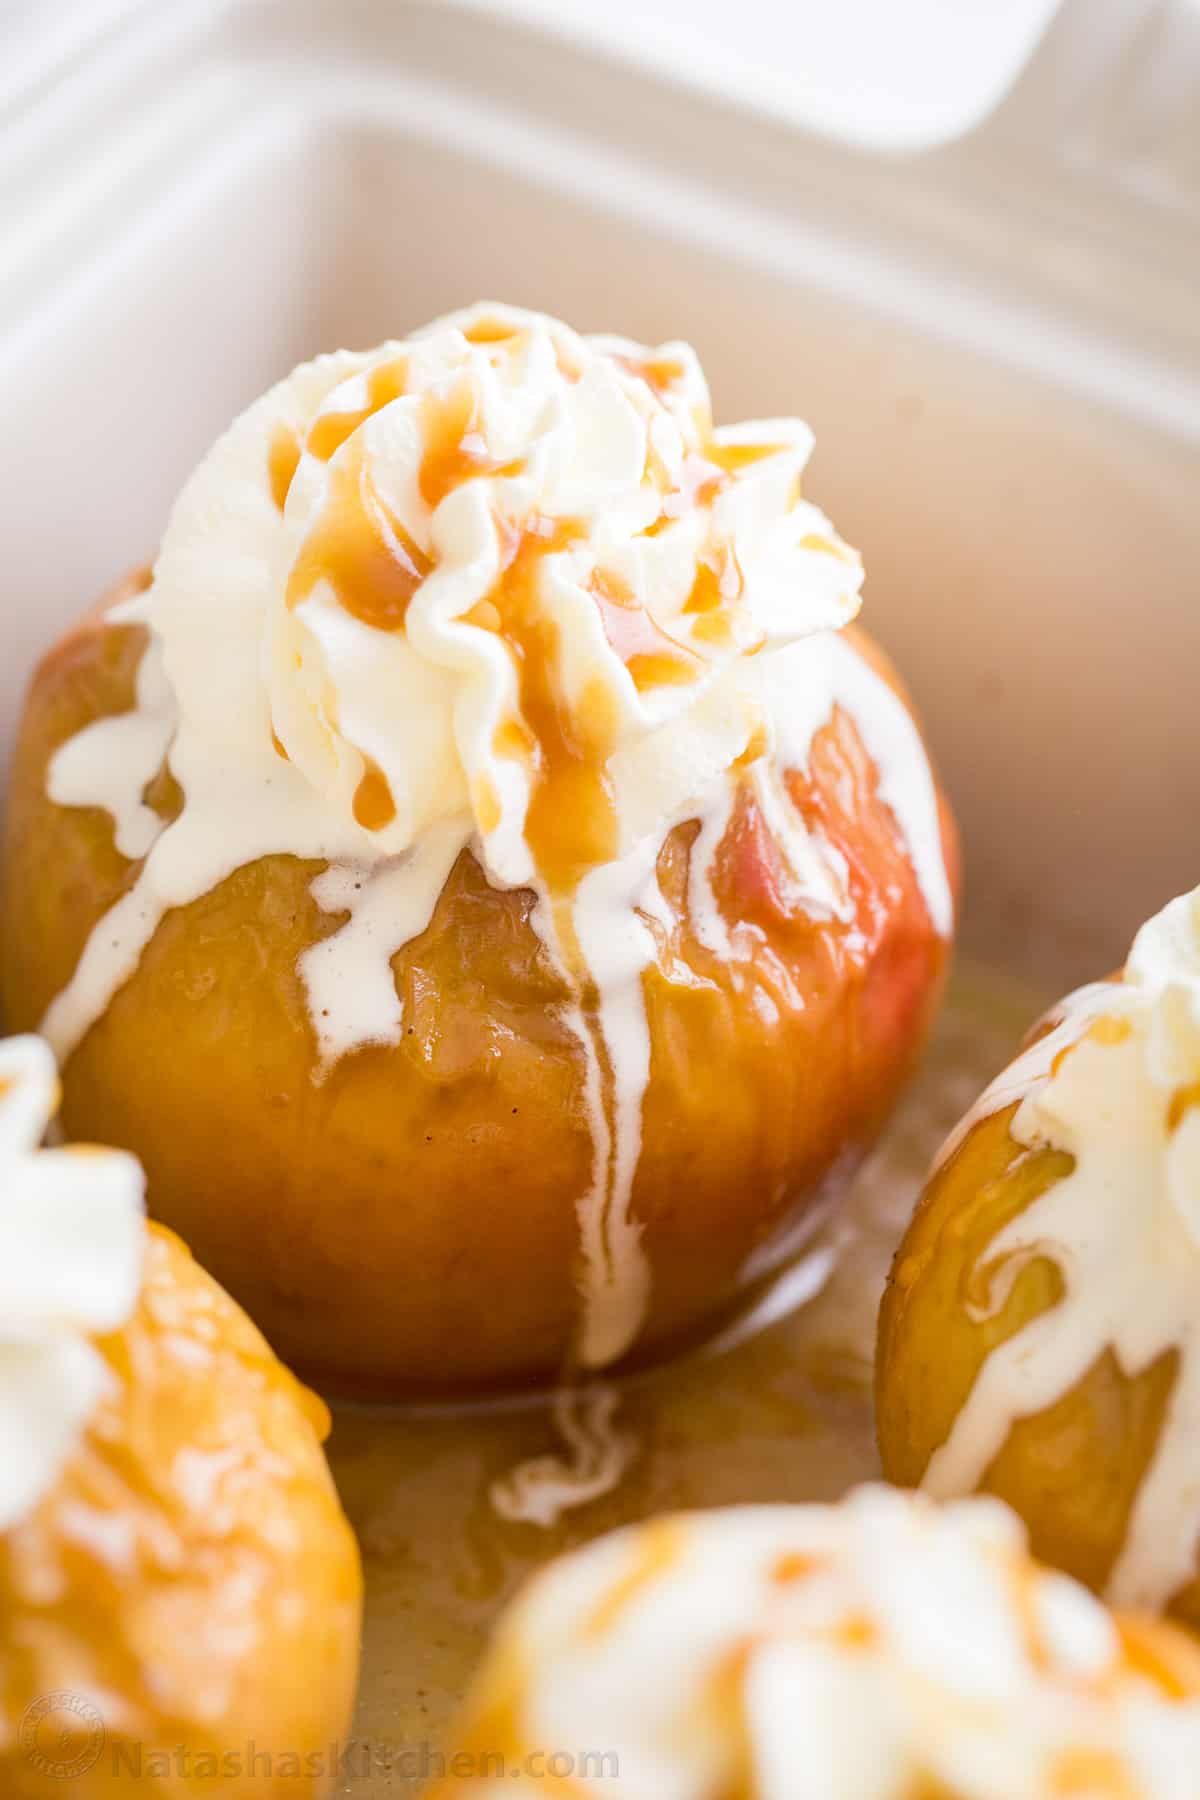 Baked apples in a baking dish topped with whipped cream and caramel sauce.